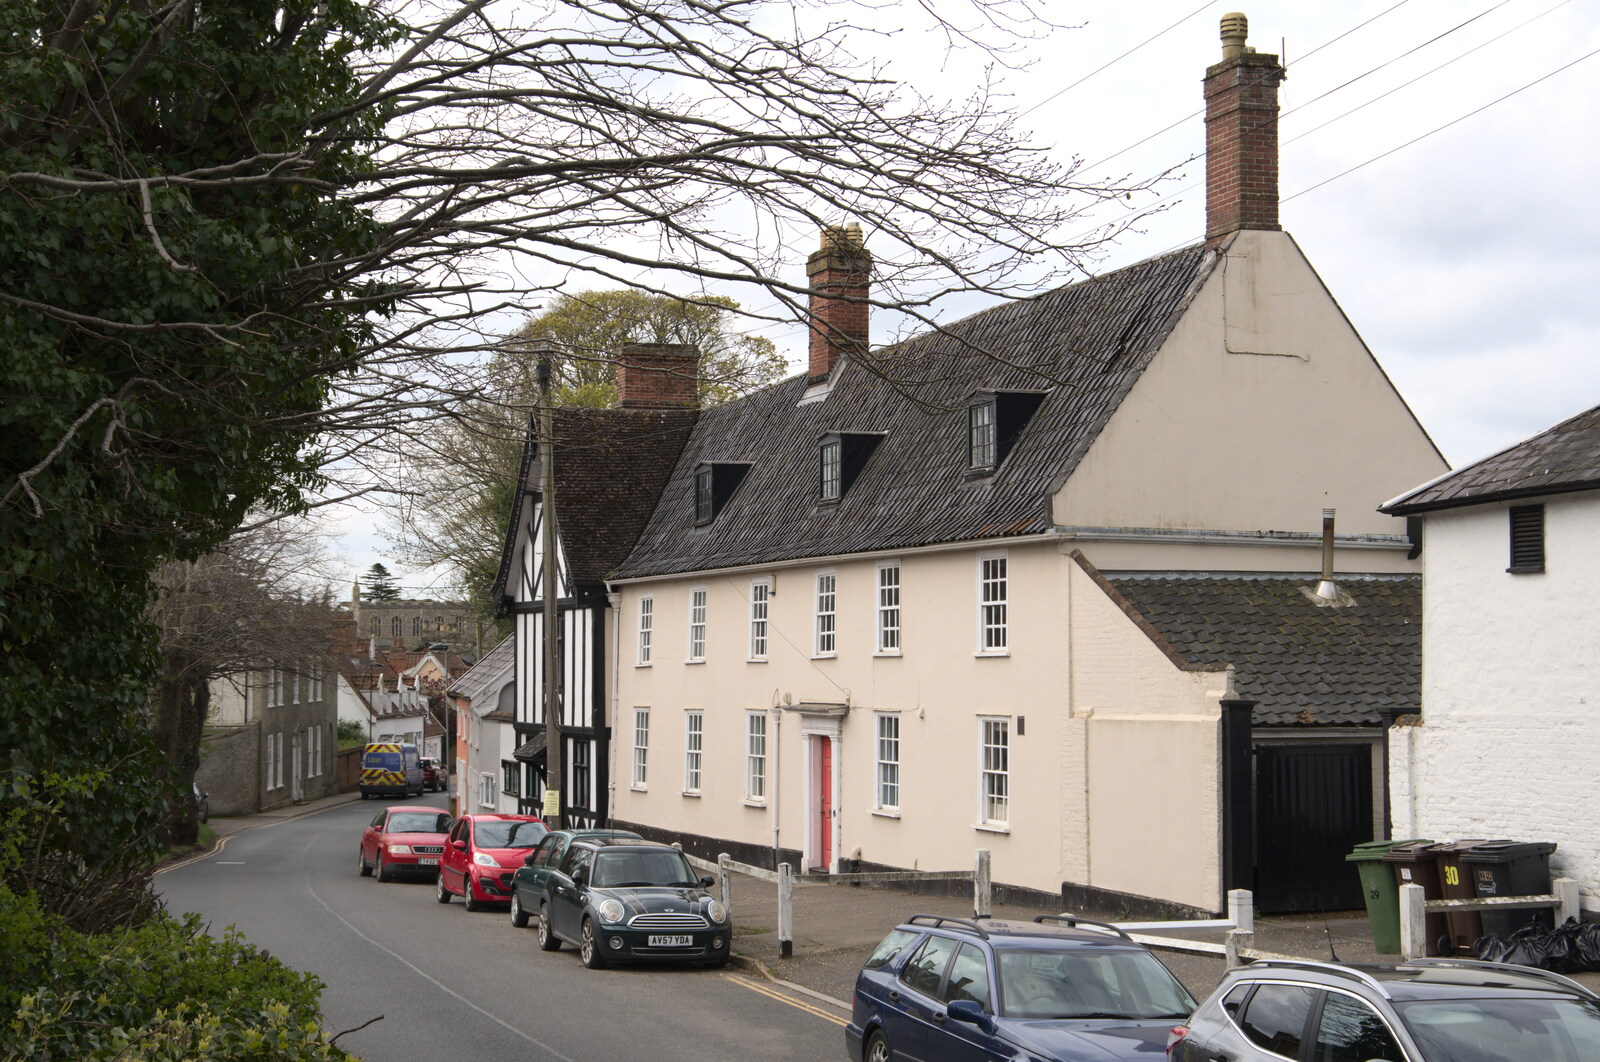 Grand house on Mount Street from The Lost Pubs of Diss, Norfolk - 26th April 2023